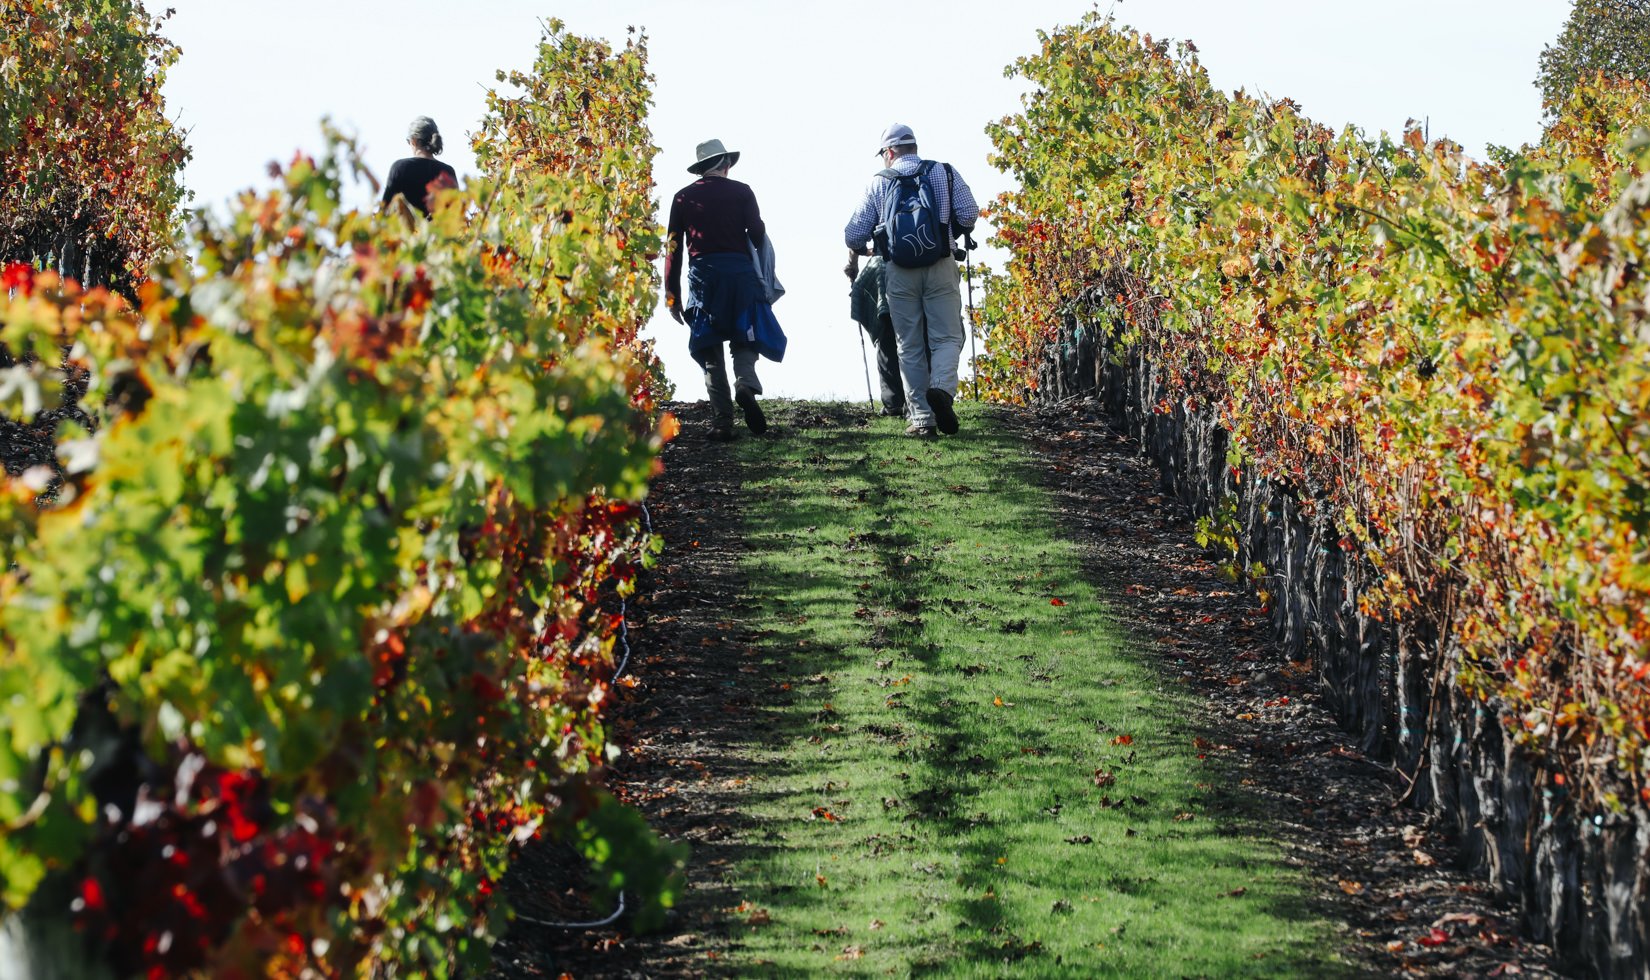 Guests walk through the vineyards as the leaves change from green to orange during fall.